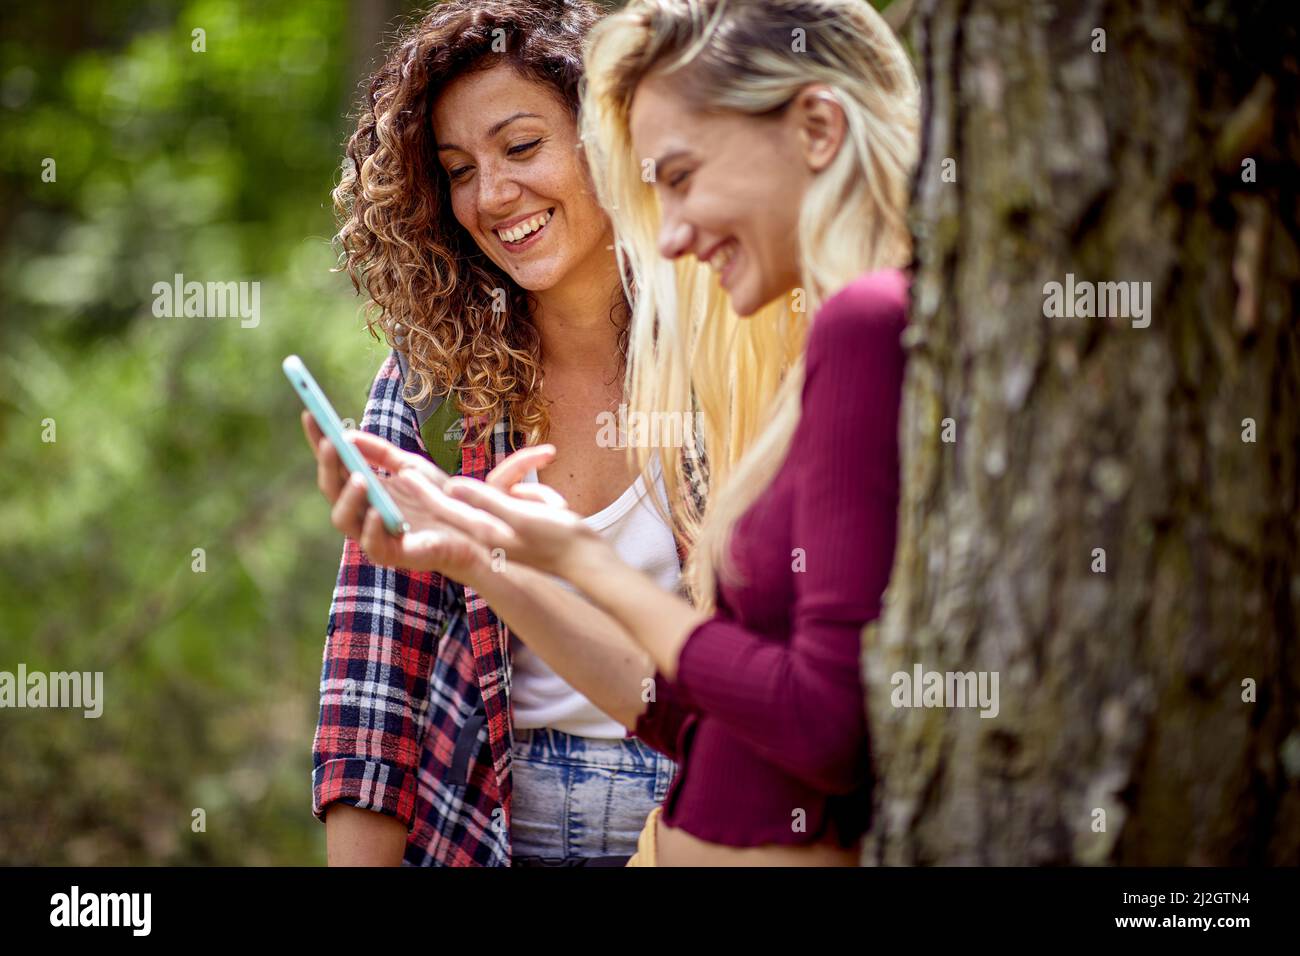 Two young cheerful girls looking at mobile phone and laughing. Summertime, mountain landscape. Freedom, friendship, nature concept. Stock Photo